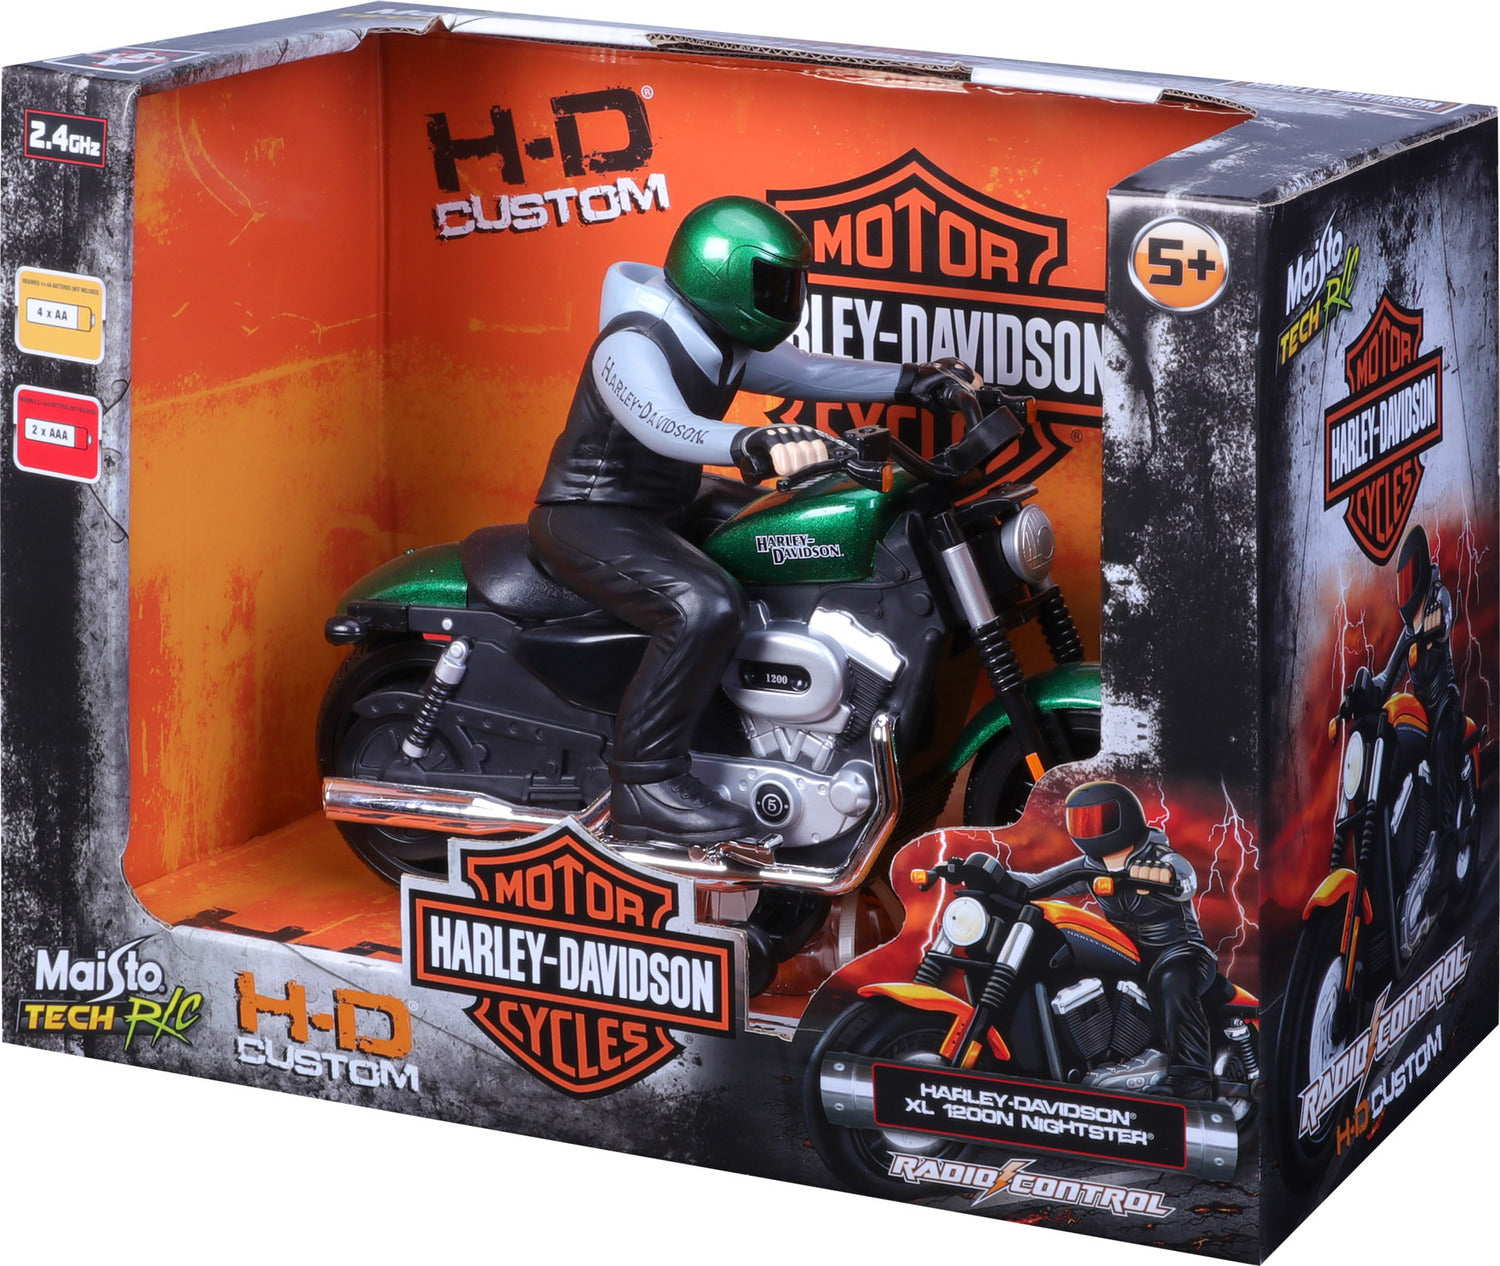 R/C H-D XL 1200N Nightster with Rider